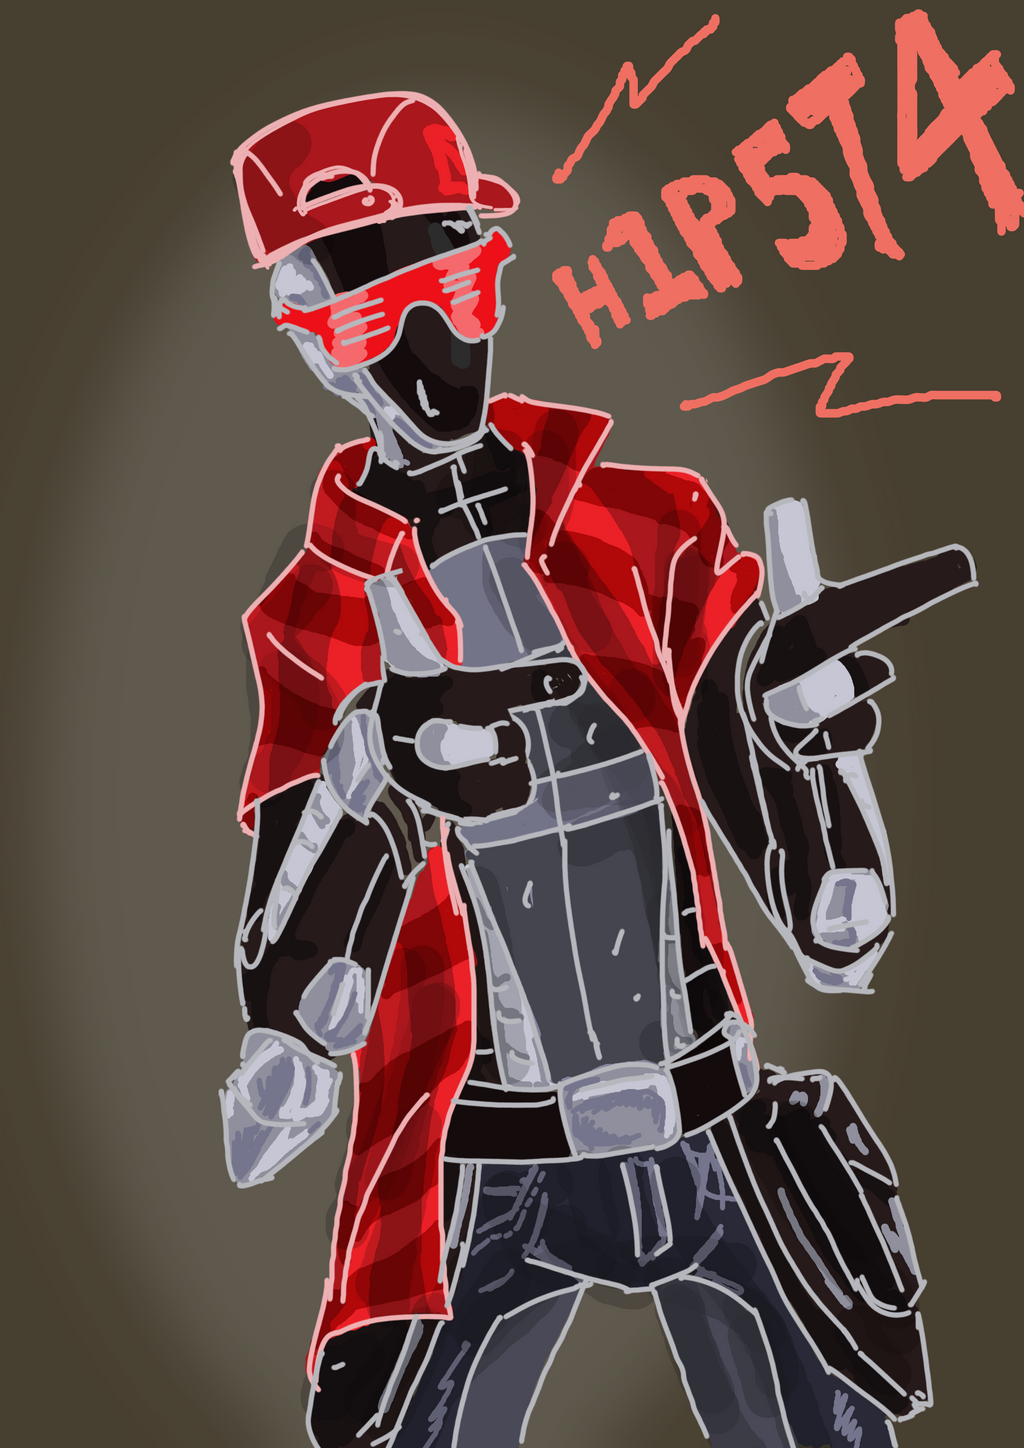 H1p5t4 by AetherCore on DeviantArt